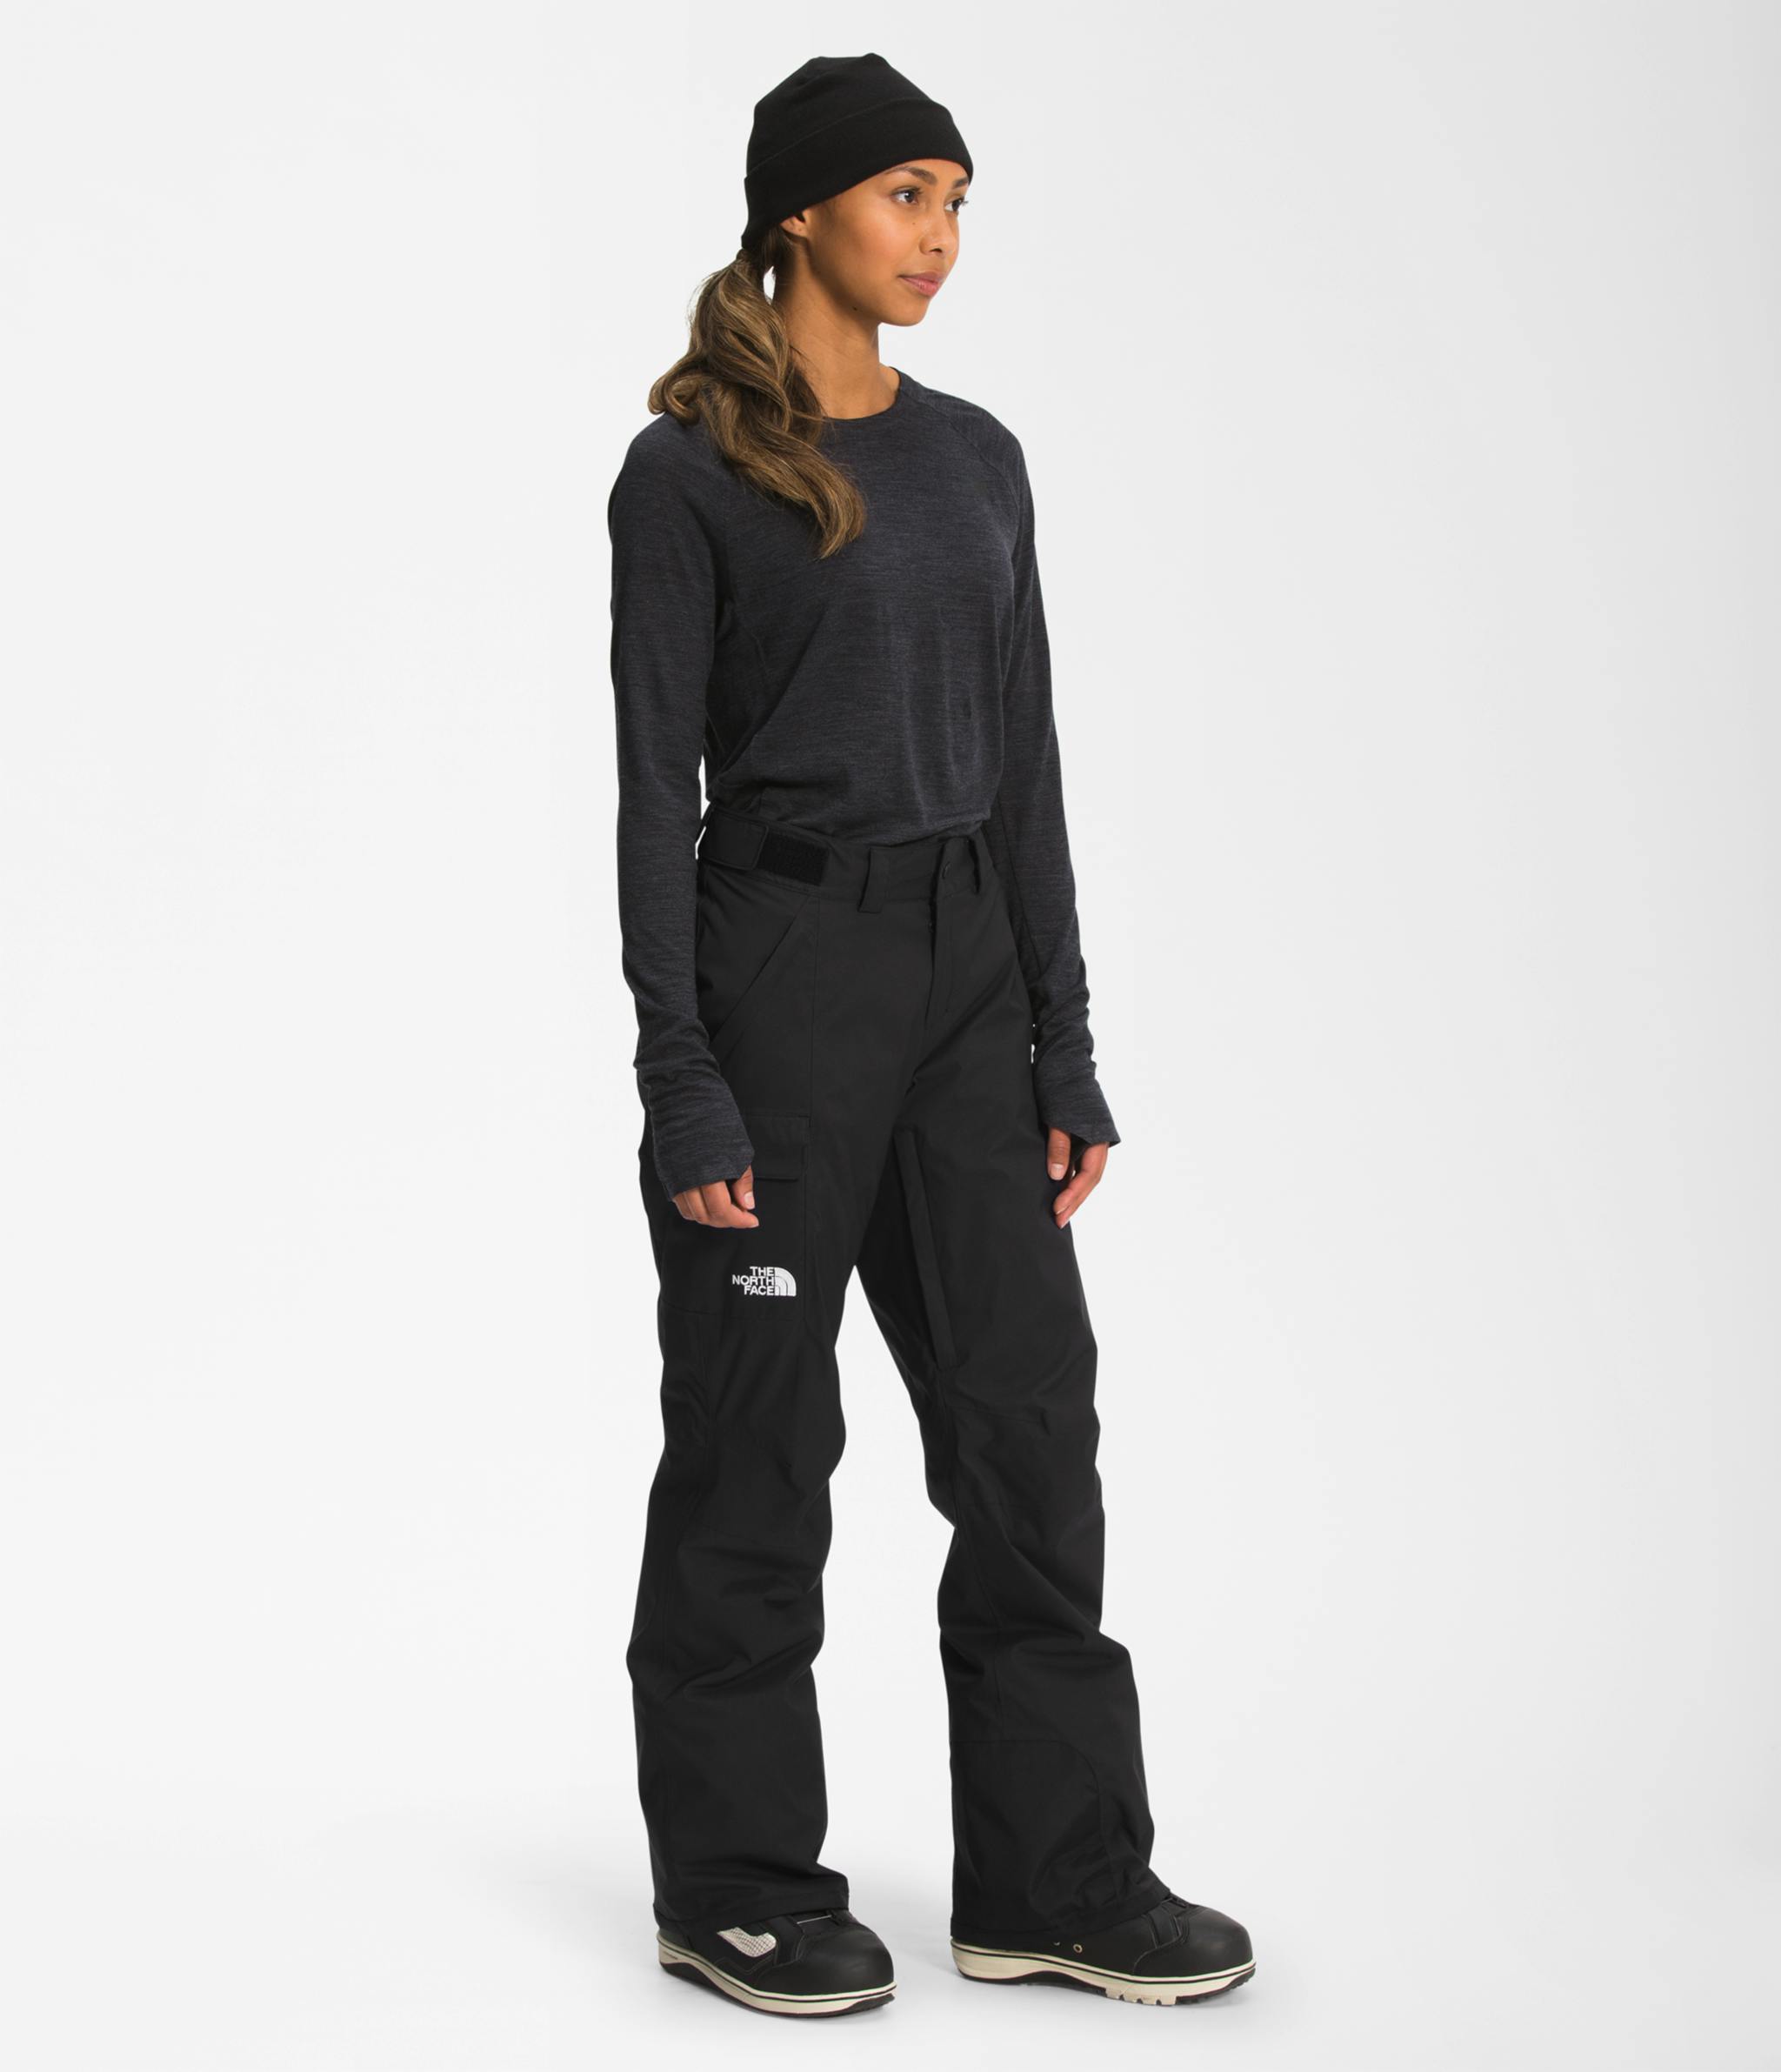 The North Face Women's Freedom Insulated Pants